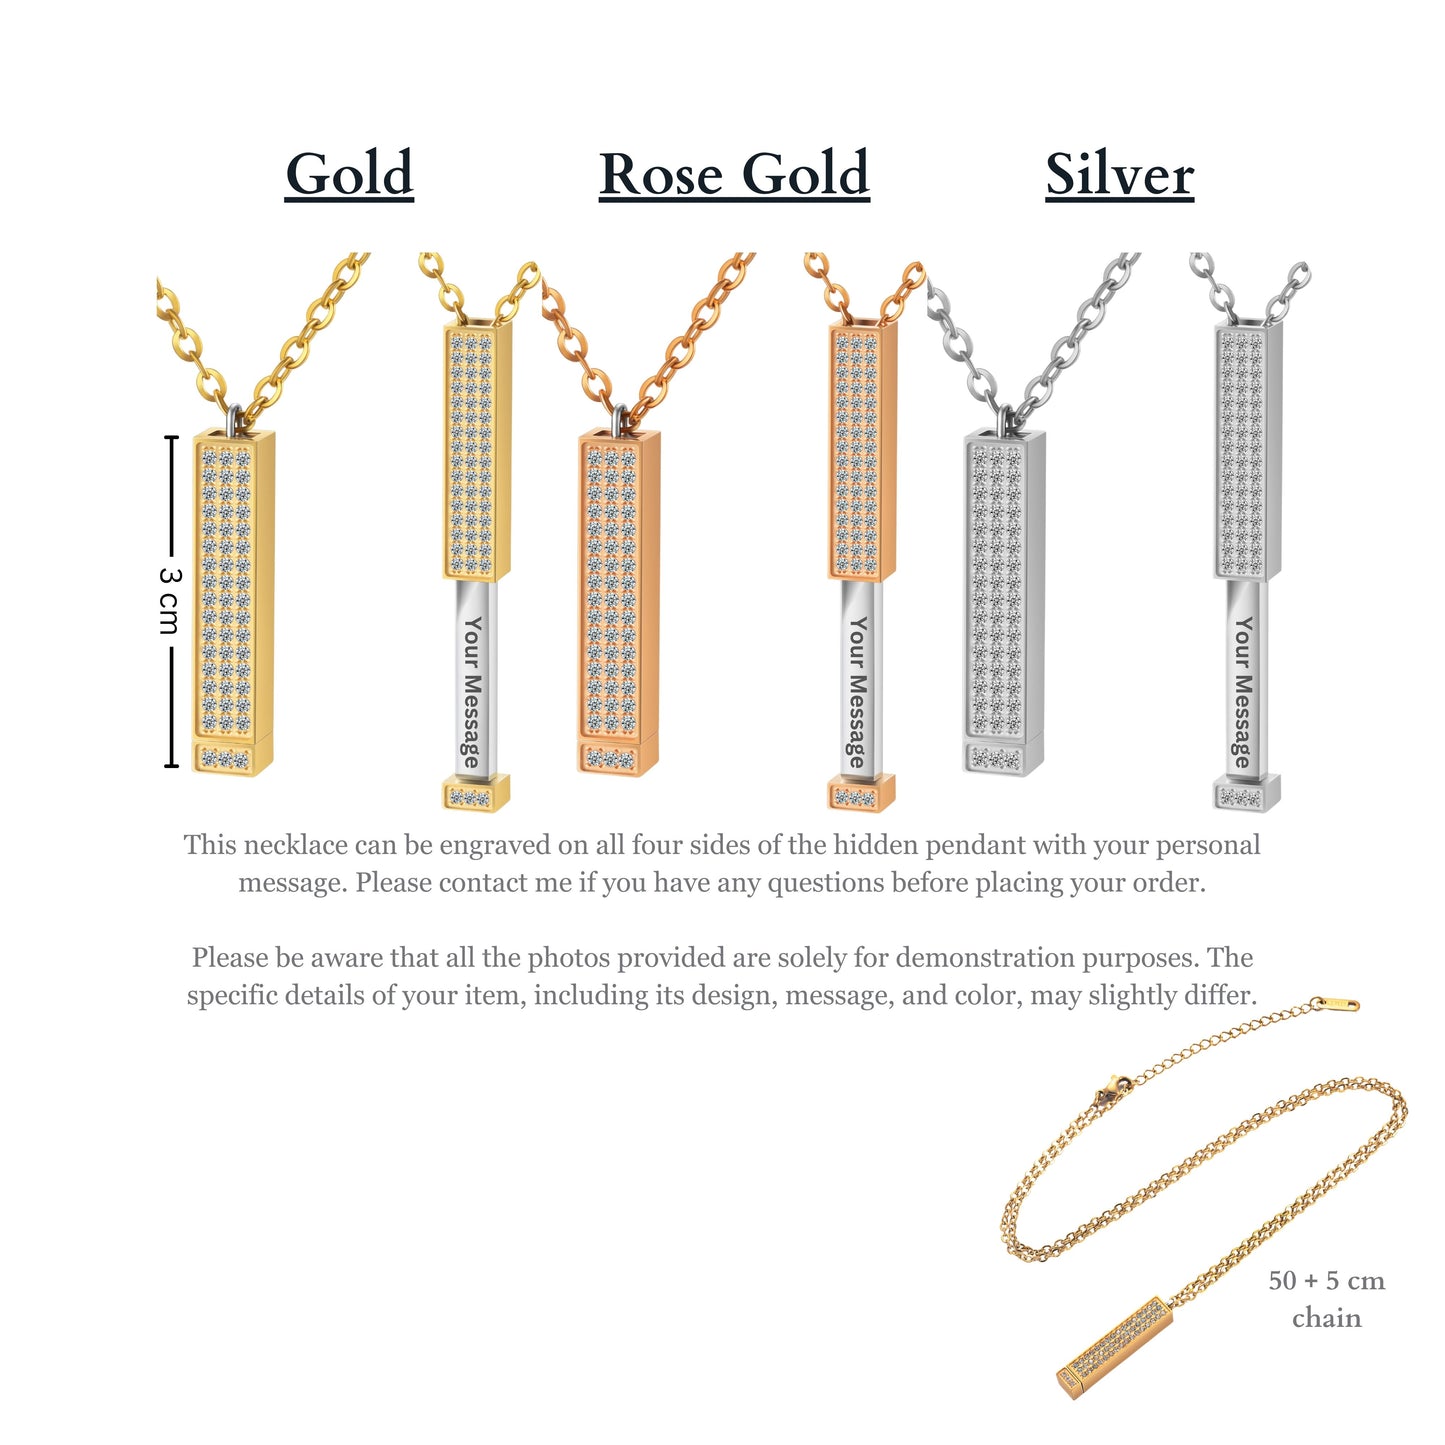 Customizable BDSM hidden pendant in gold, rose gold, and silver